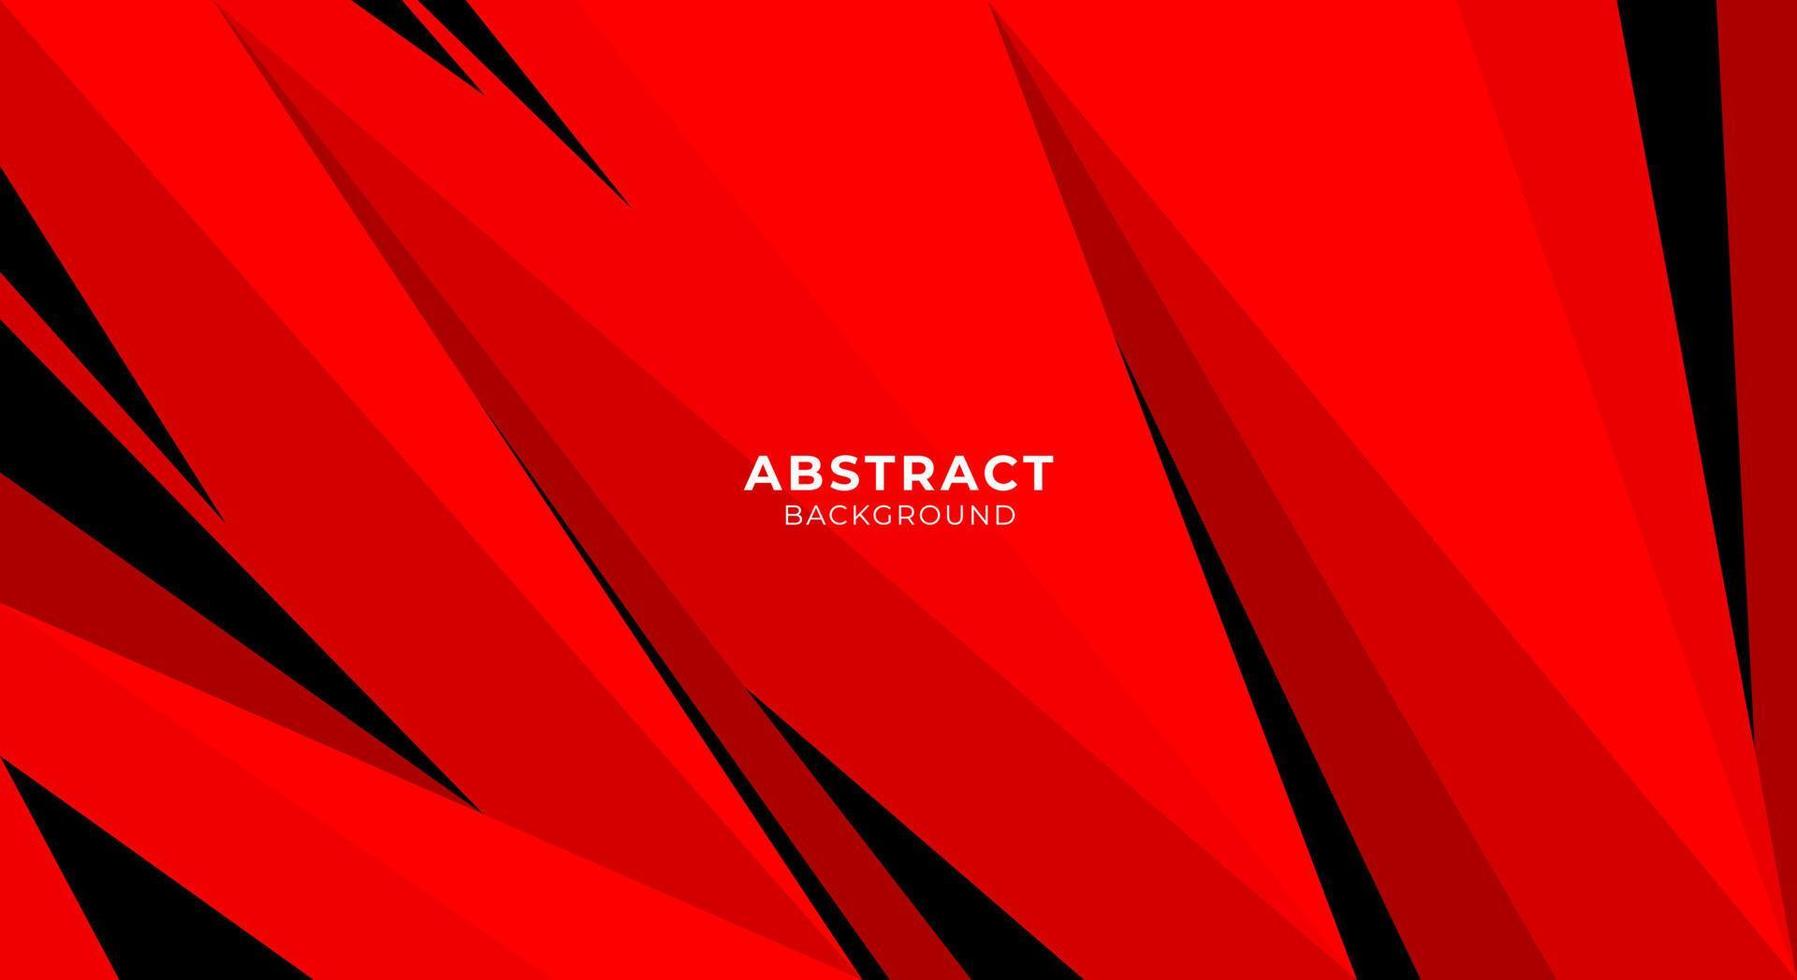 Flat red abstract background vector